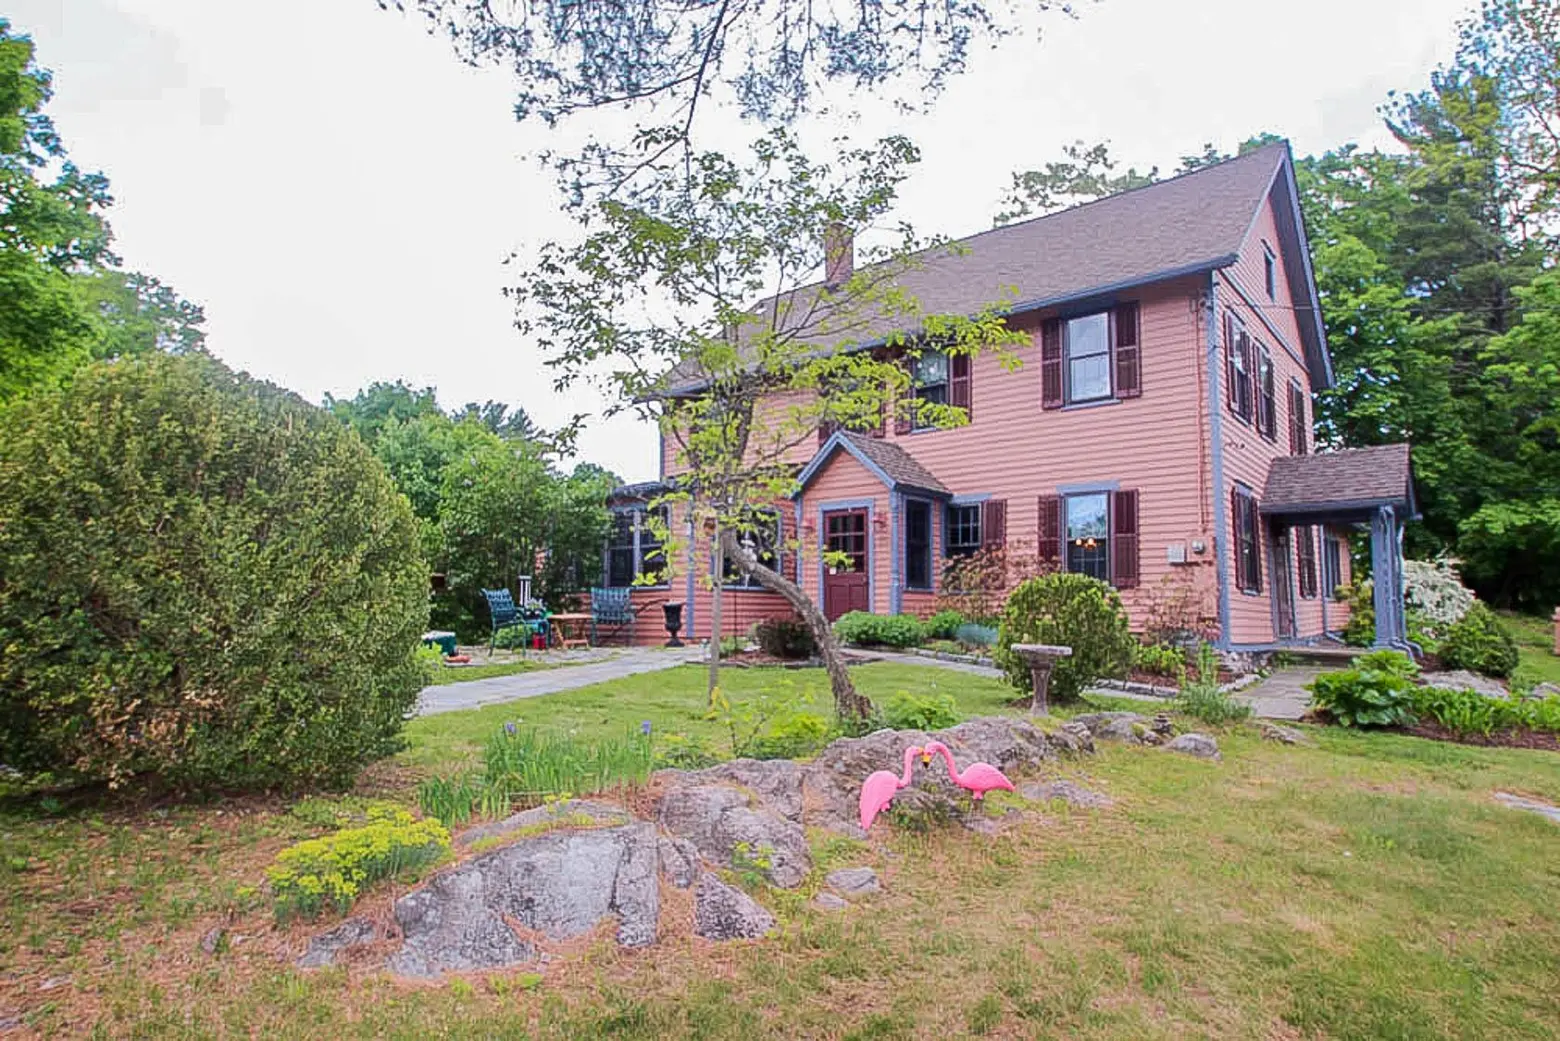 For just $450K, a charming Connecticut cottage with a unique musical history